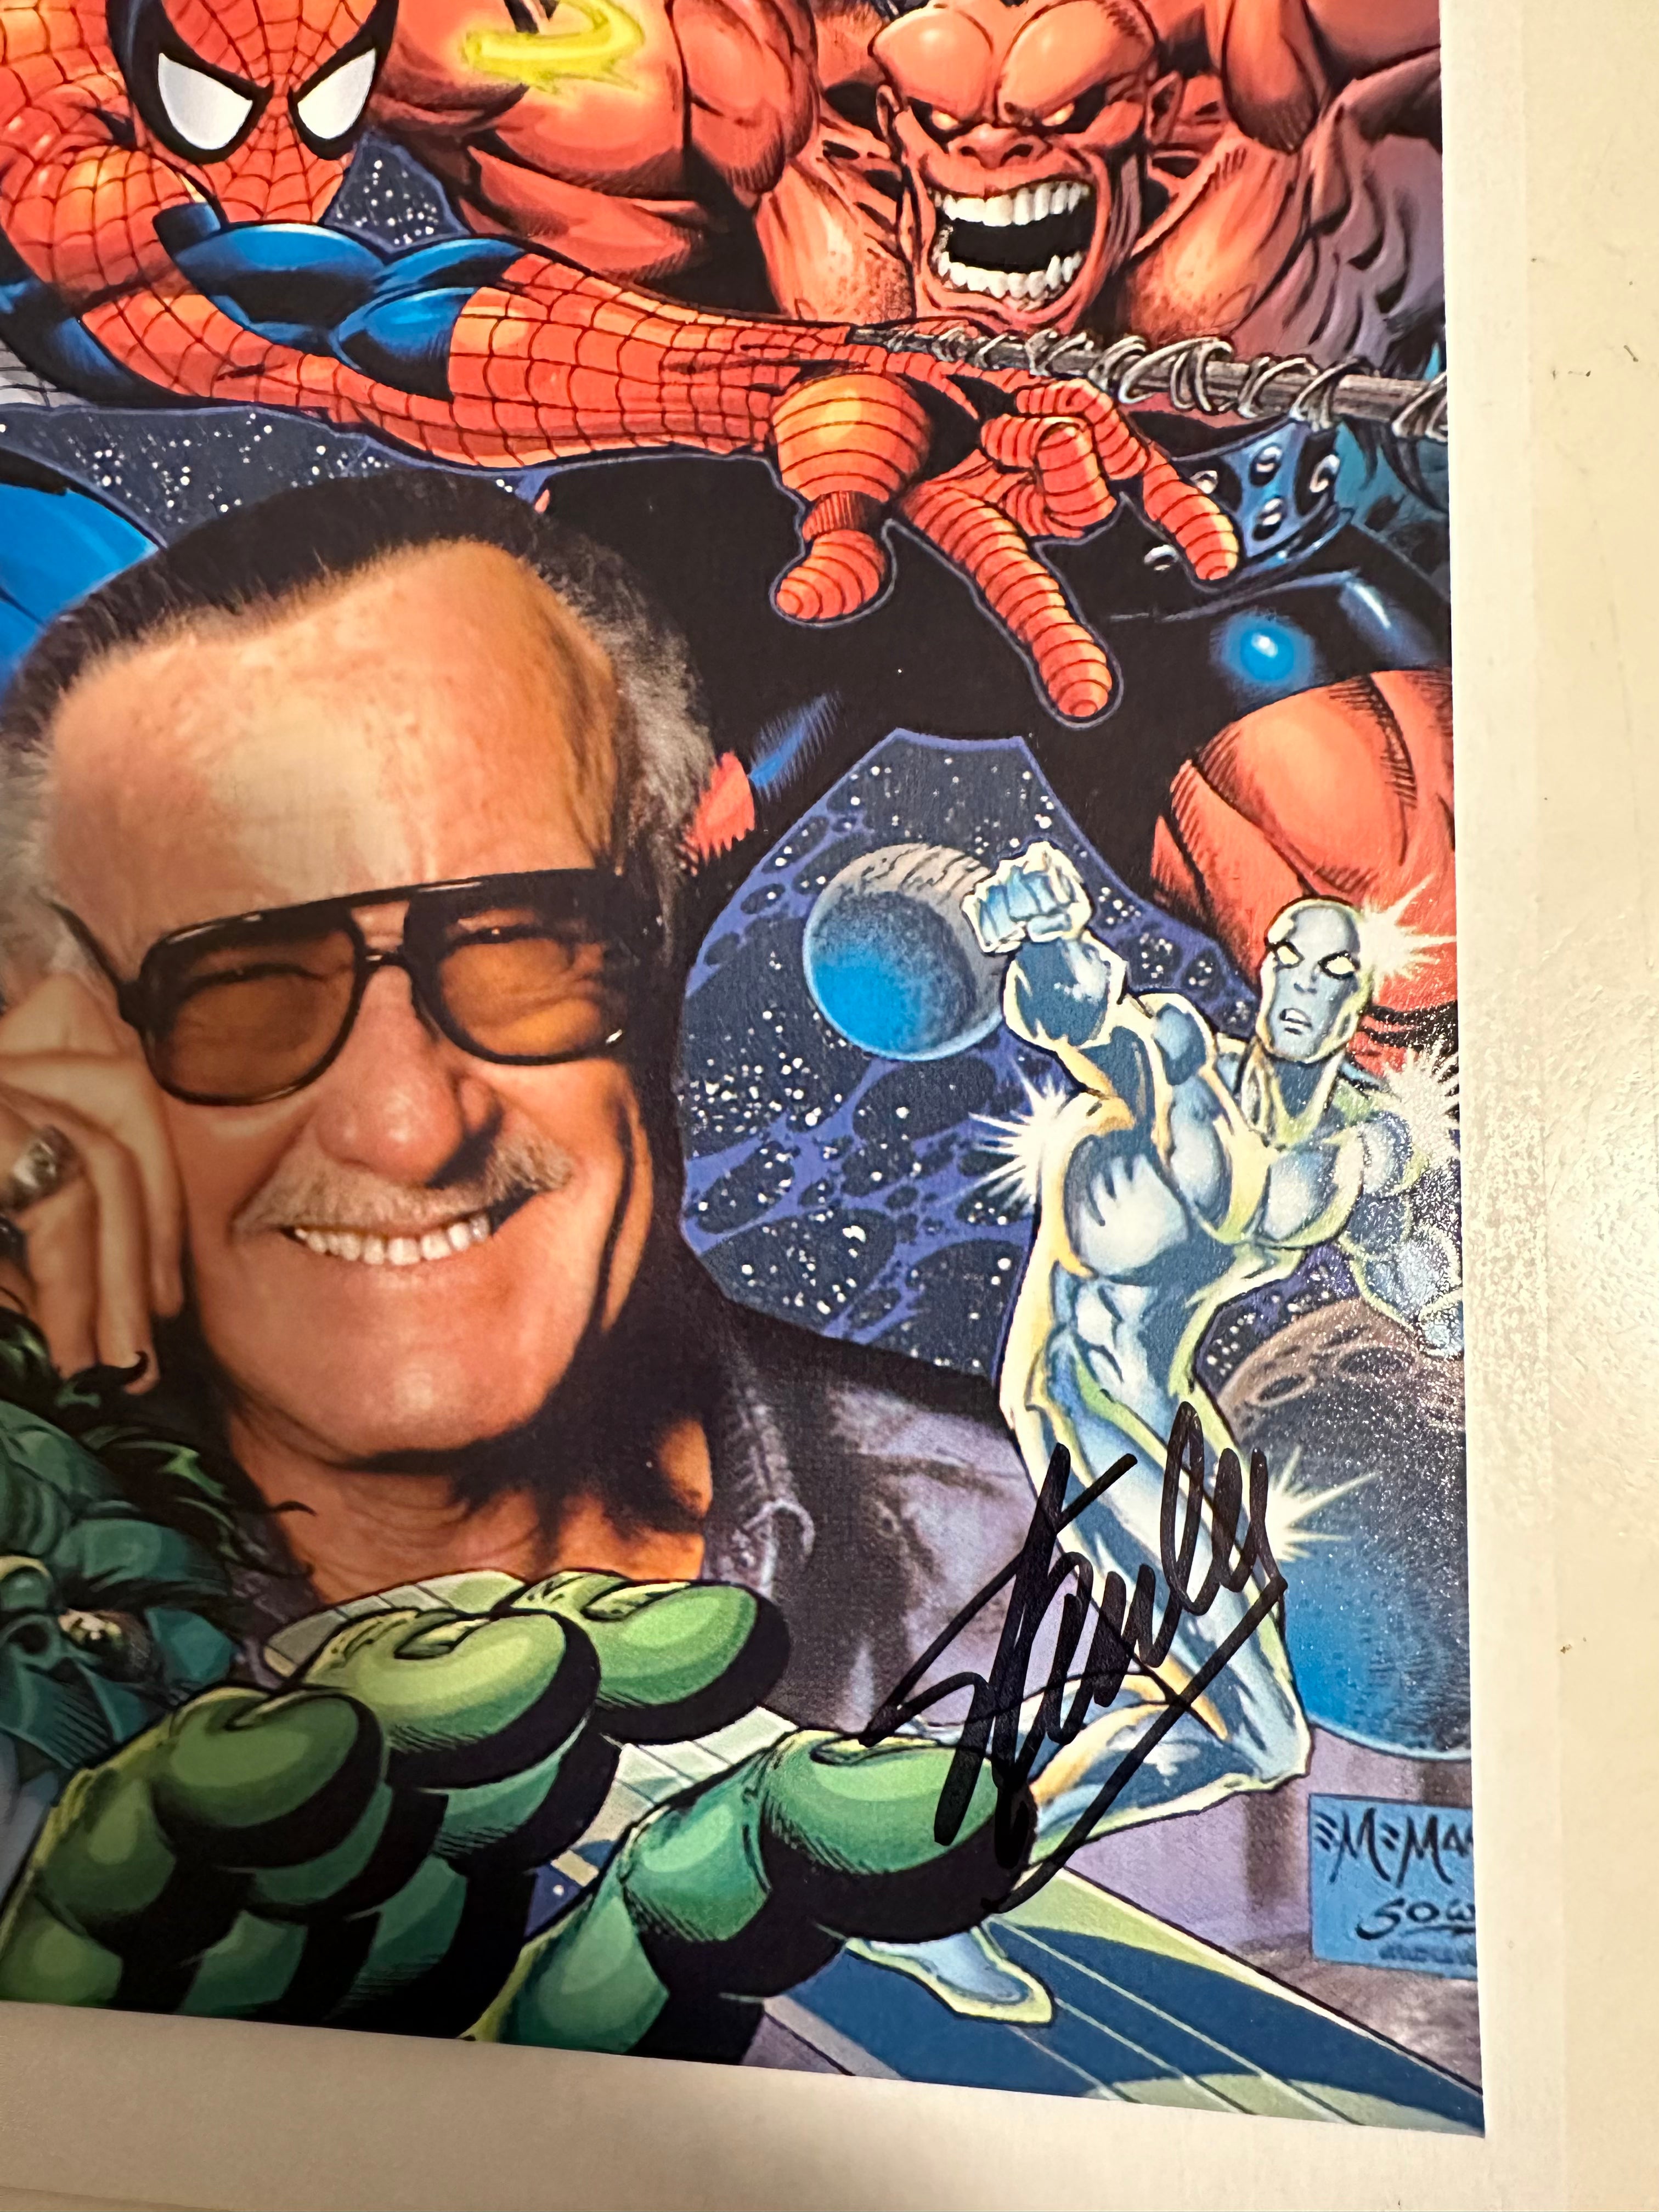 Marvel Comics legend Stan Lee autograph 8x10 photo certified by Fanexpo with COA